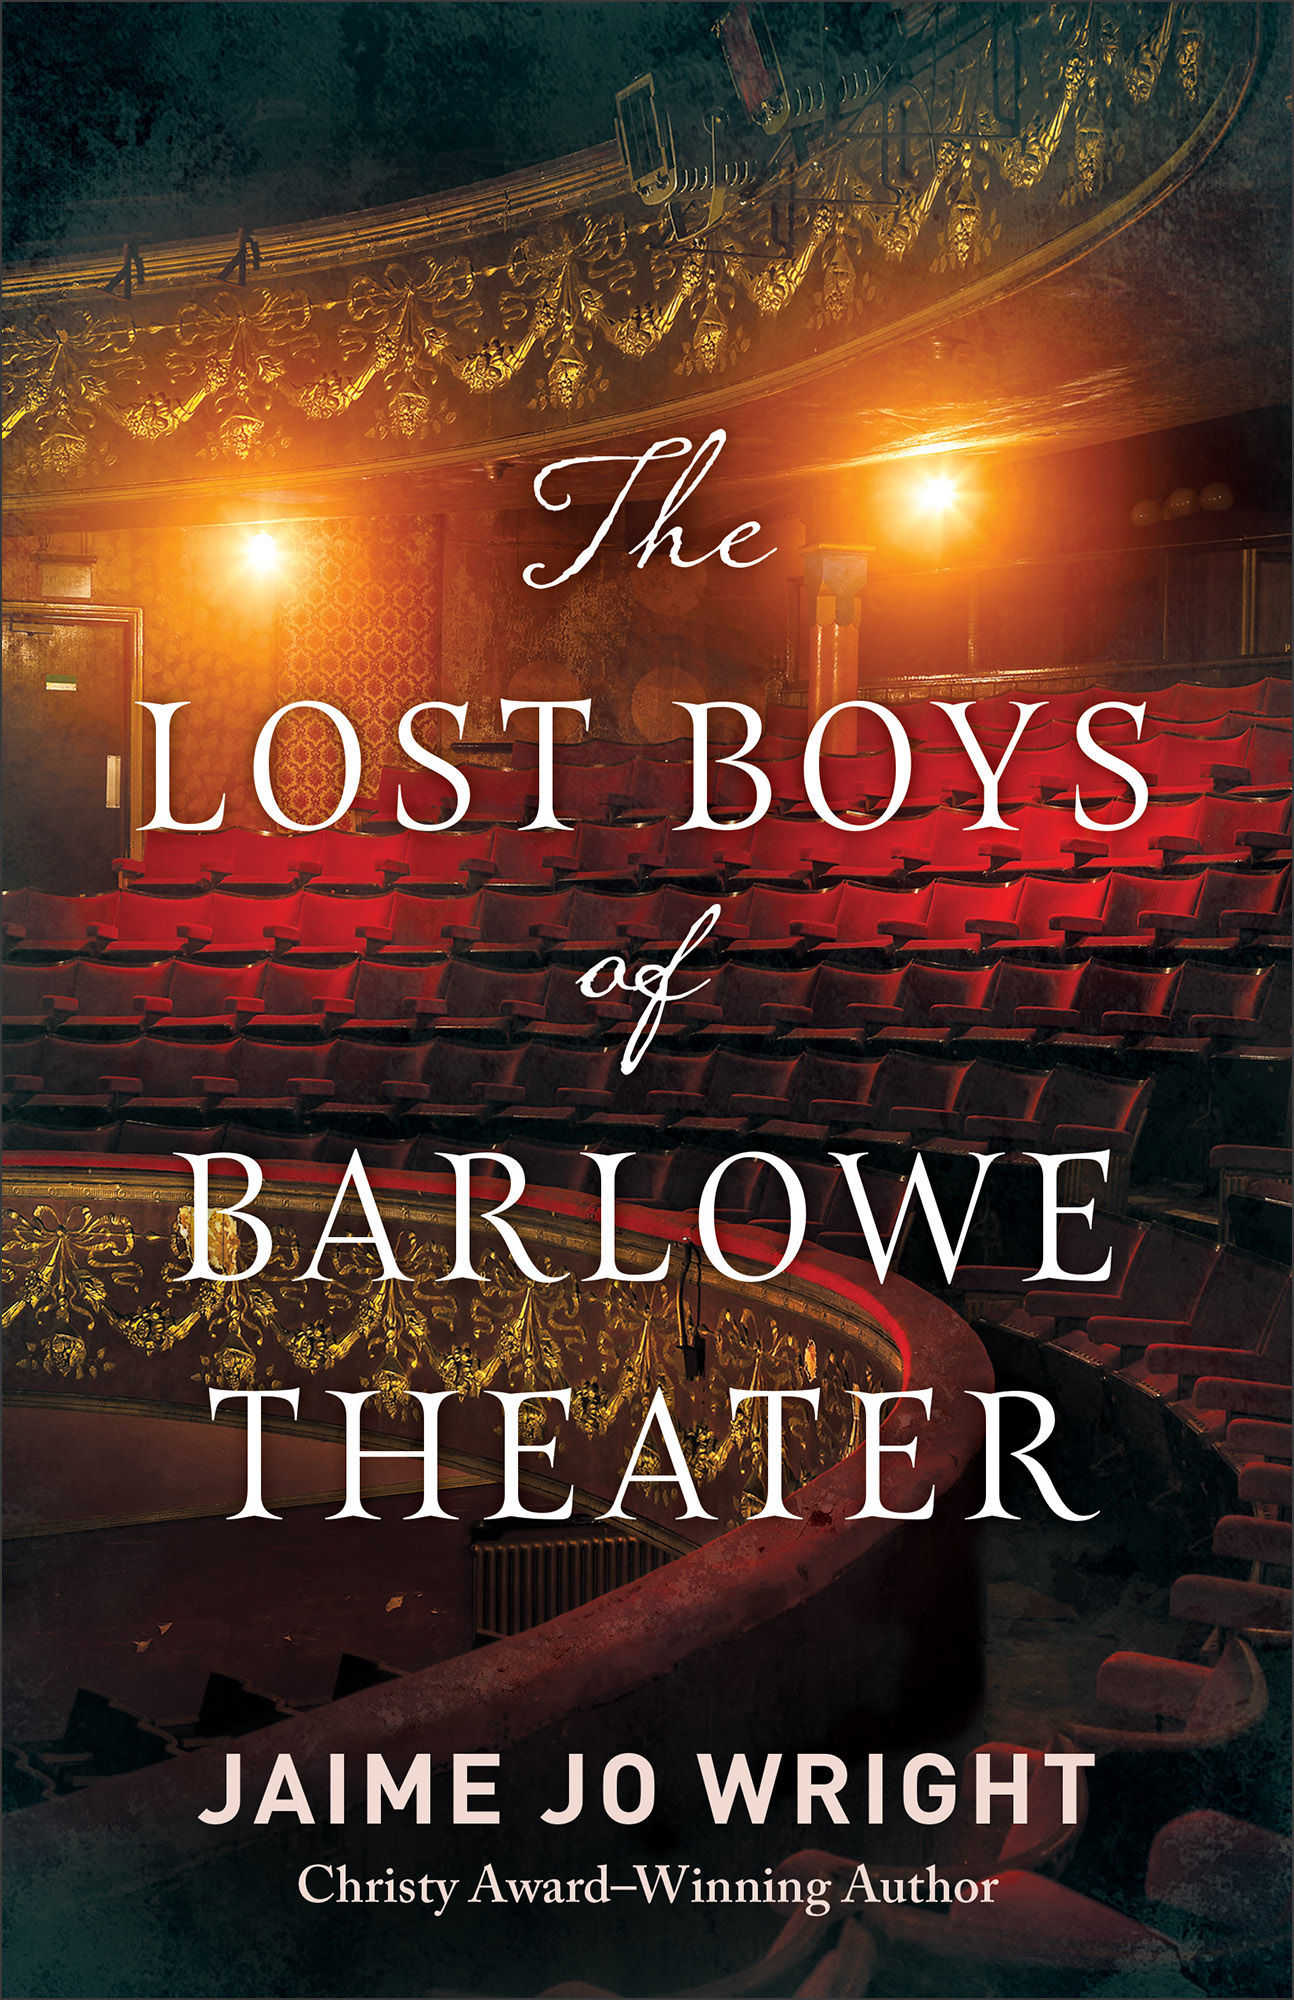 The Lost Boys of Barlowe Theater by Jaime Jo Wright